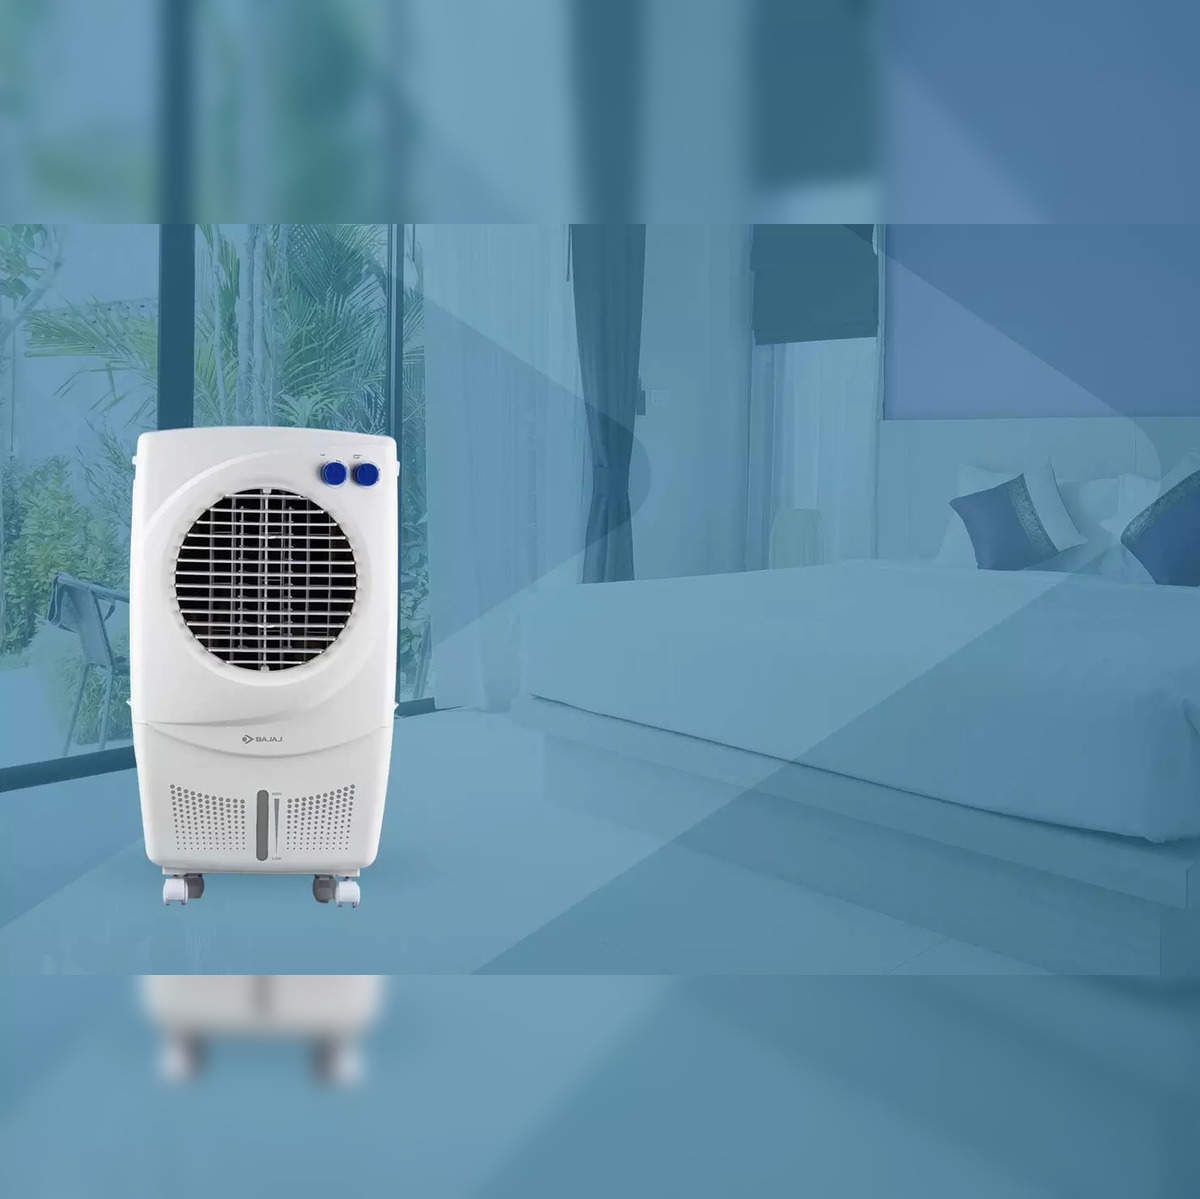 https://img.etimg.com/thumb/width-1200,height-1200,imgsize-42258,resizemode-75,msid-98314810/top-trending-products/electronics/air-coolers/8-best-air-coolers-for-your-home-to-beat-the-heat-this-summer.jpg